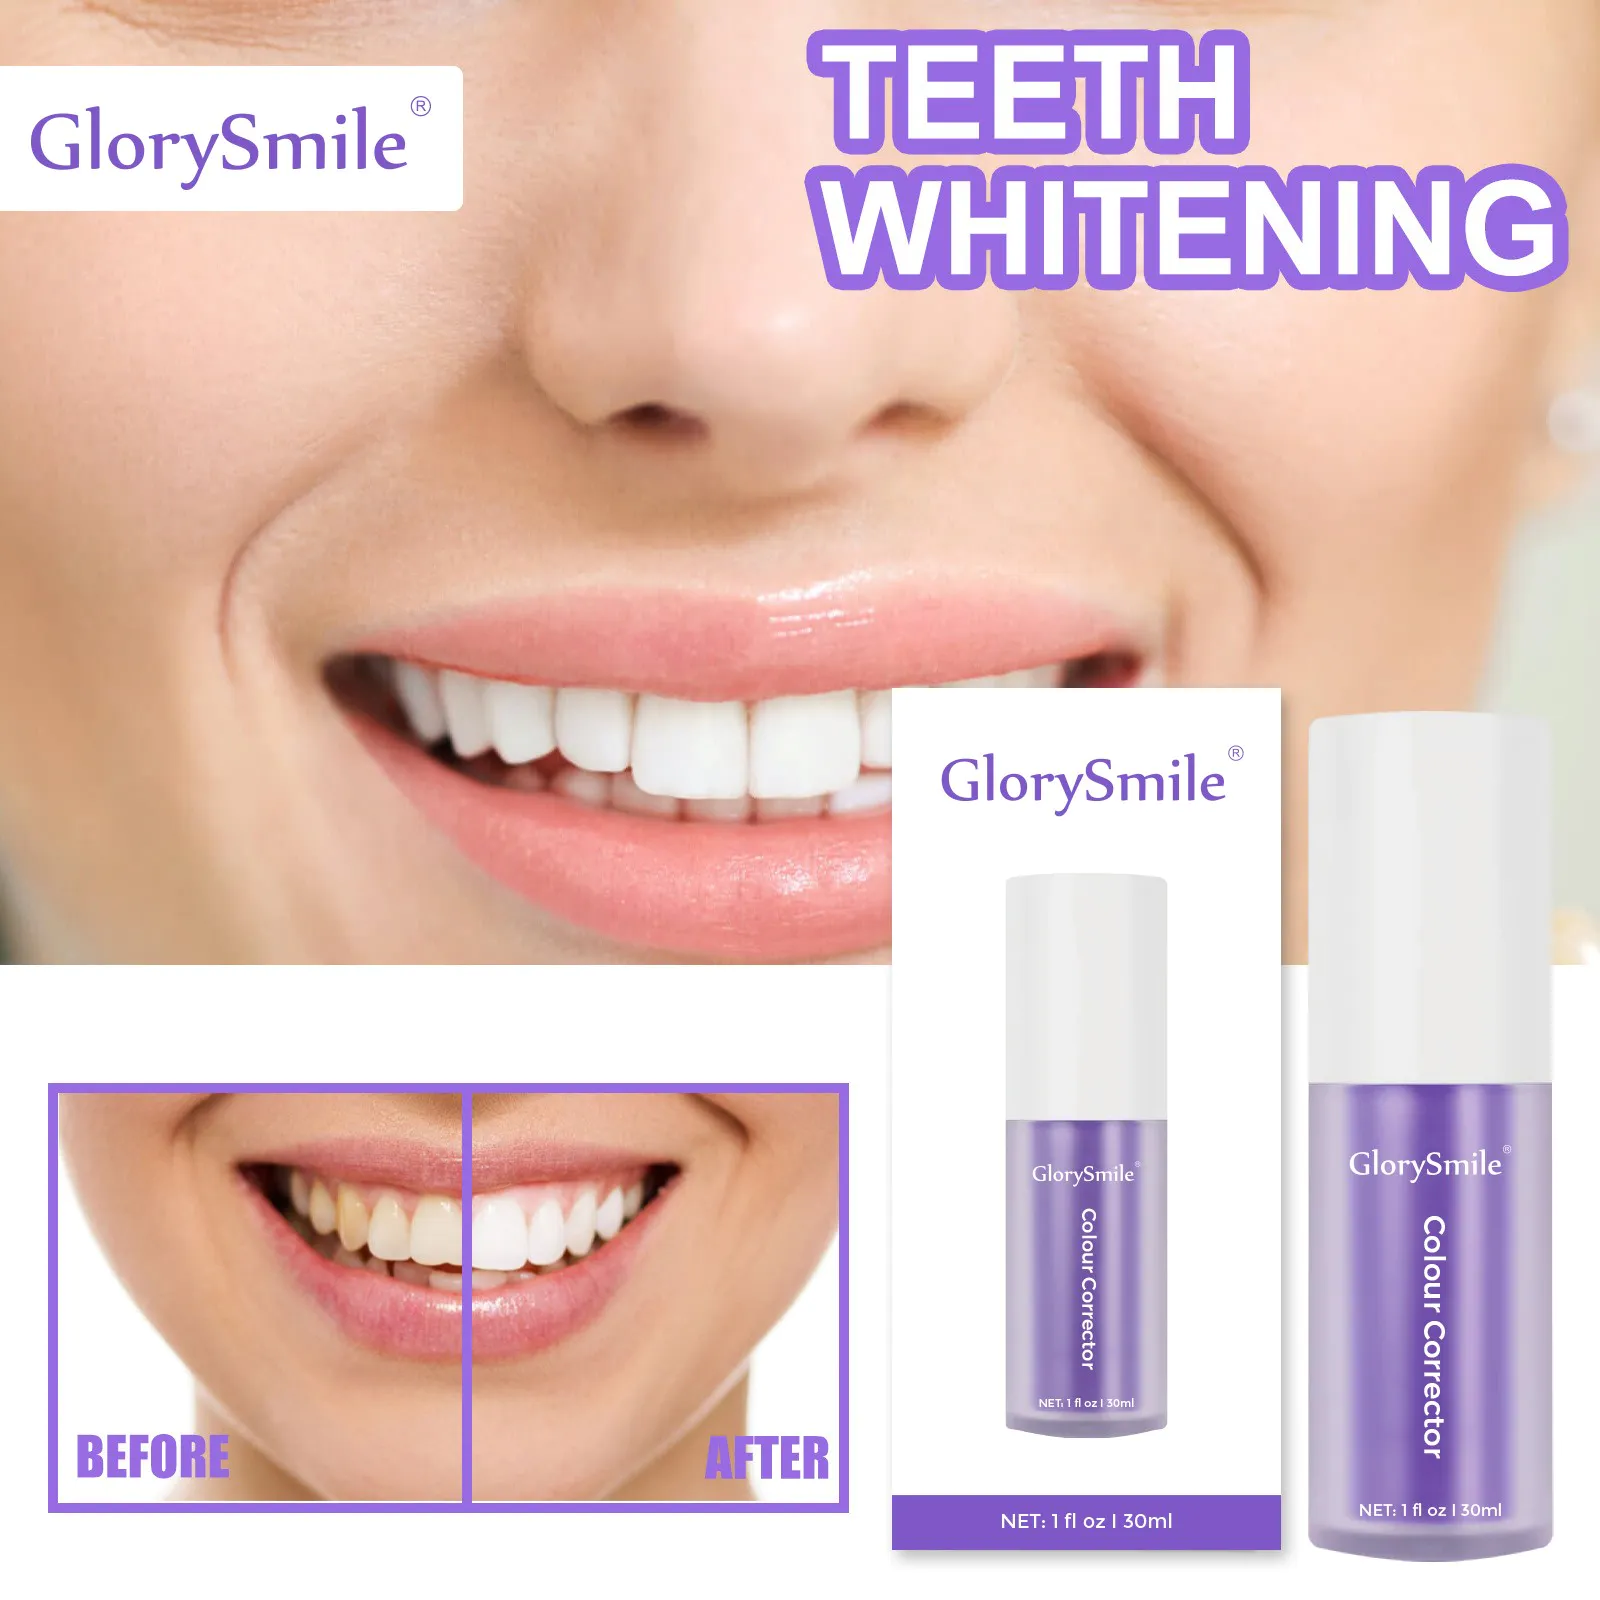 GlorySmile teeth whitening mousse company for home usage